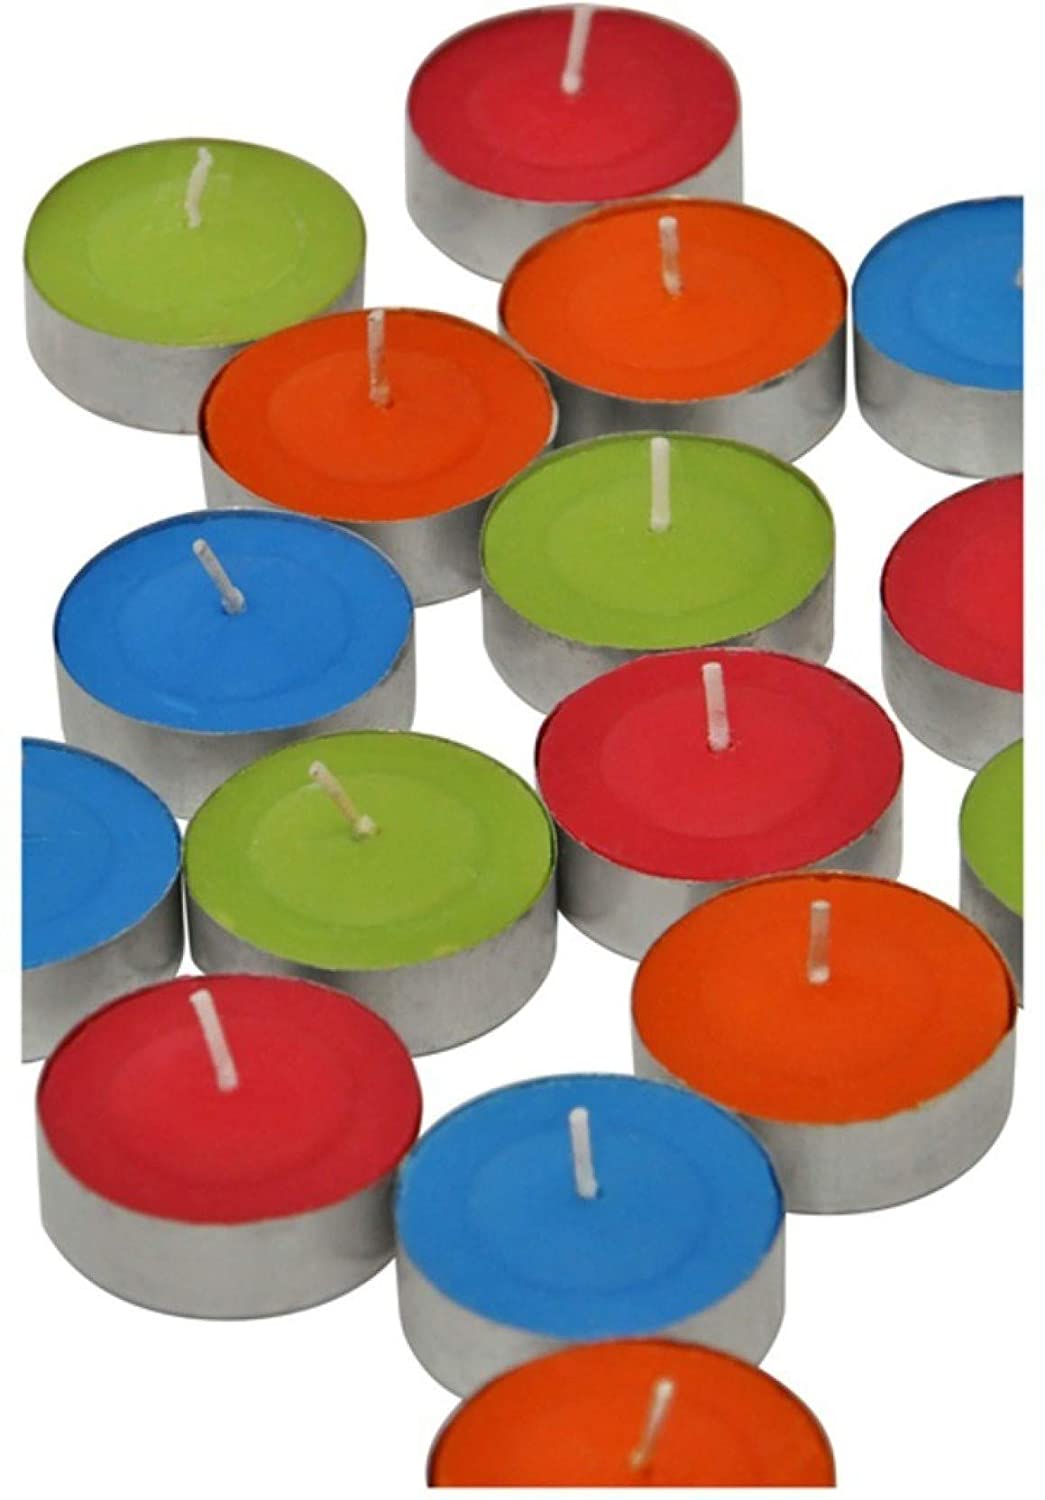 New Jaipur Handicraft Wax Candles 🕯 Pack of 100 Lamansh® Pack of 100 Multicolored Tealight Wax Candles 🕯 / Unscented Wax Candles for Home Decoration 🎀Birthday Parties